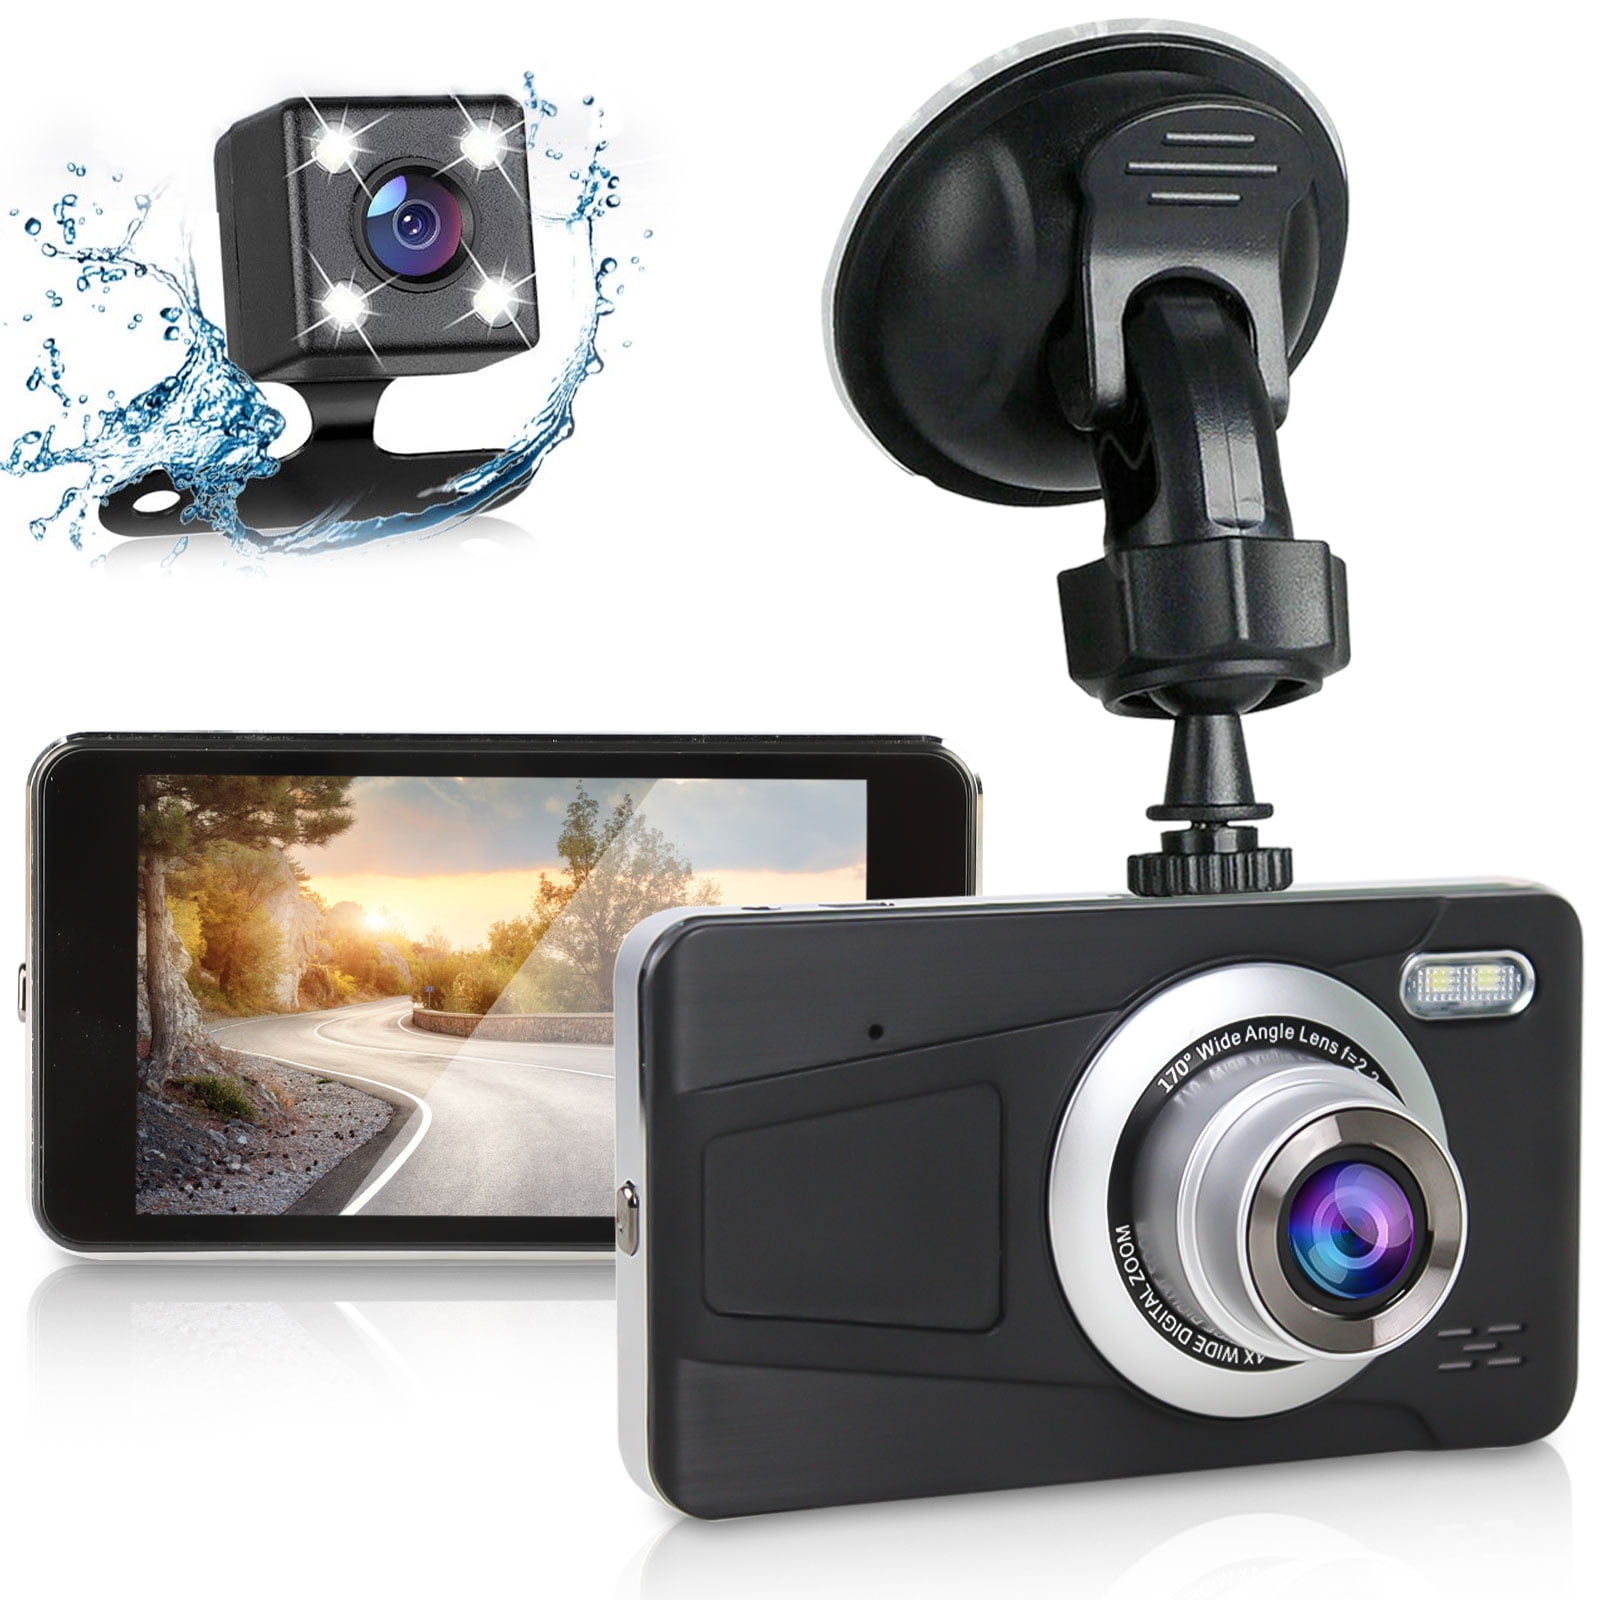 Dash Cameras 1080P Full HD In Car Dash Cam DVR Car Dashboard Camera WDR Dashcam for Cars Video Recorder 3 Inch IPS Screen Loop Recording 170°Wide Angle G-Sensor Parking Monitor Motion Detection 